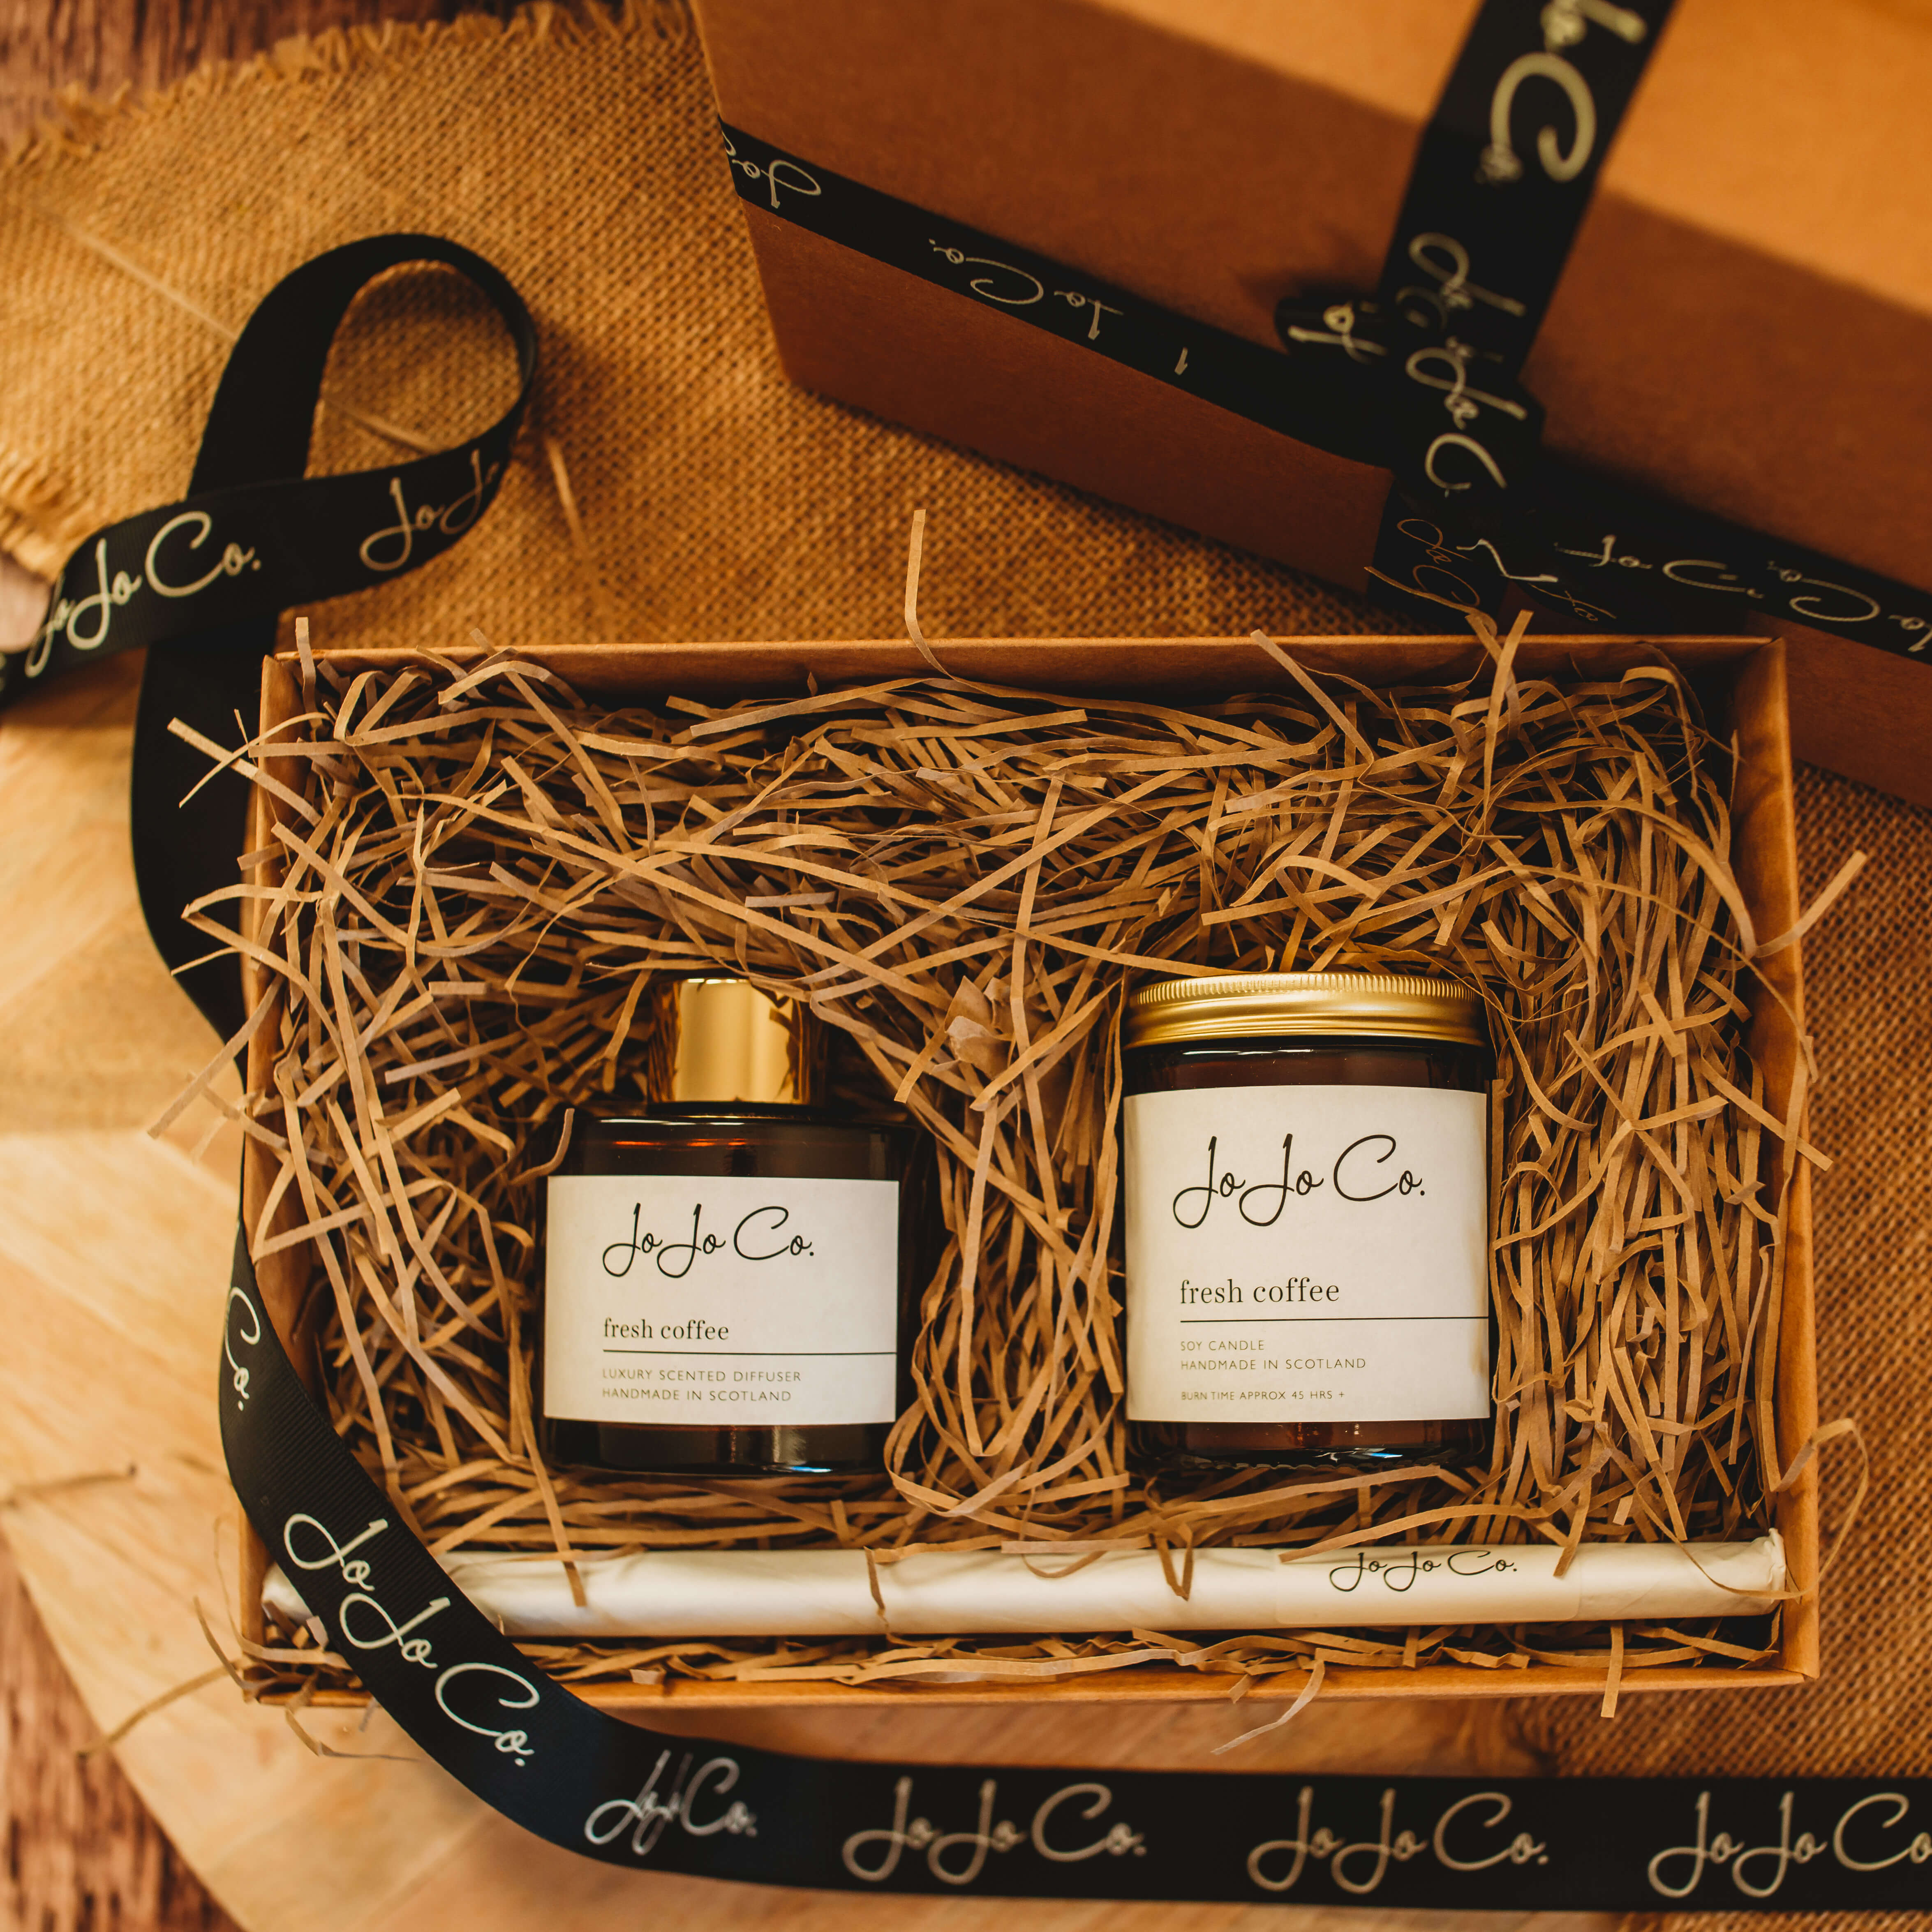 Amber glass jars with gold lids and white JoJo Co. labels are nestled on top of shredded packing paper in a cardboard box. A black tie is draped over it, with a gift box in the background.